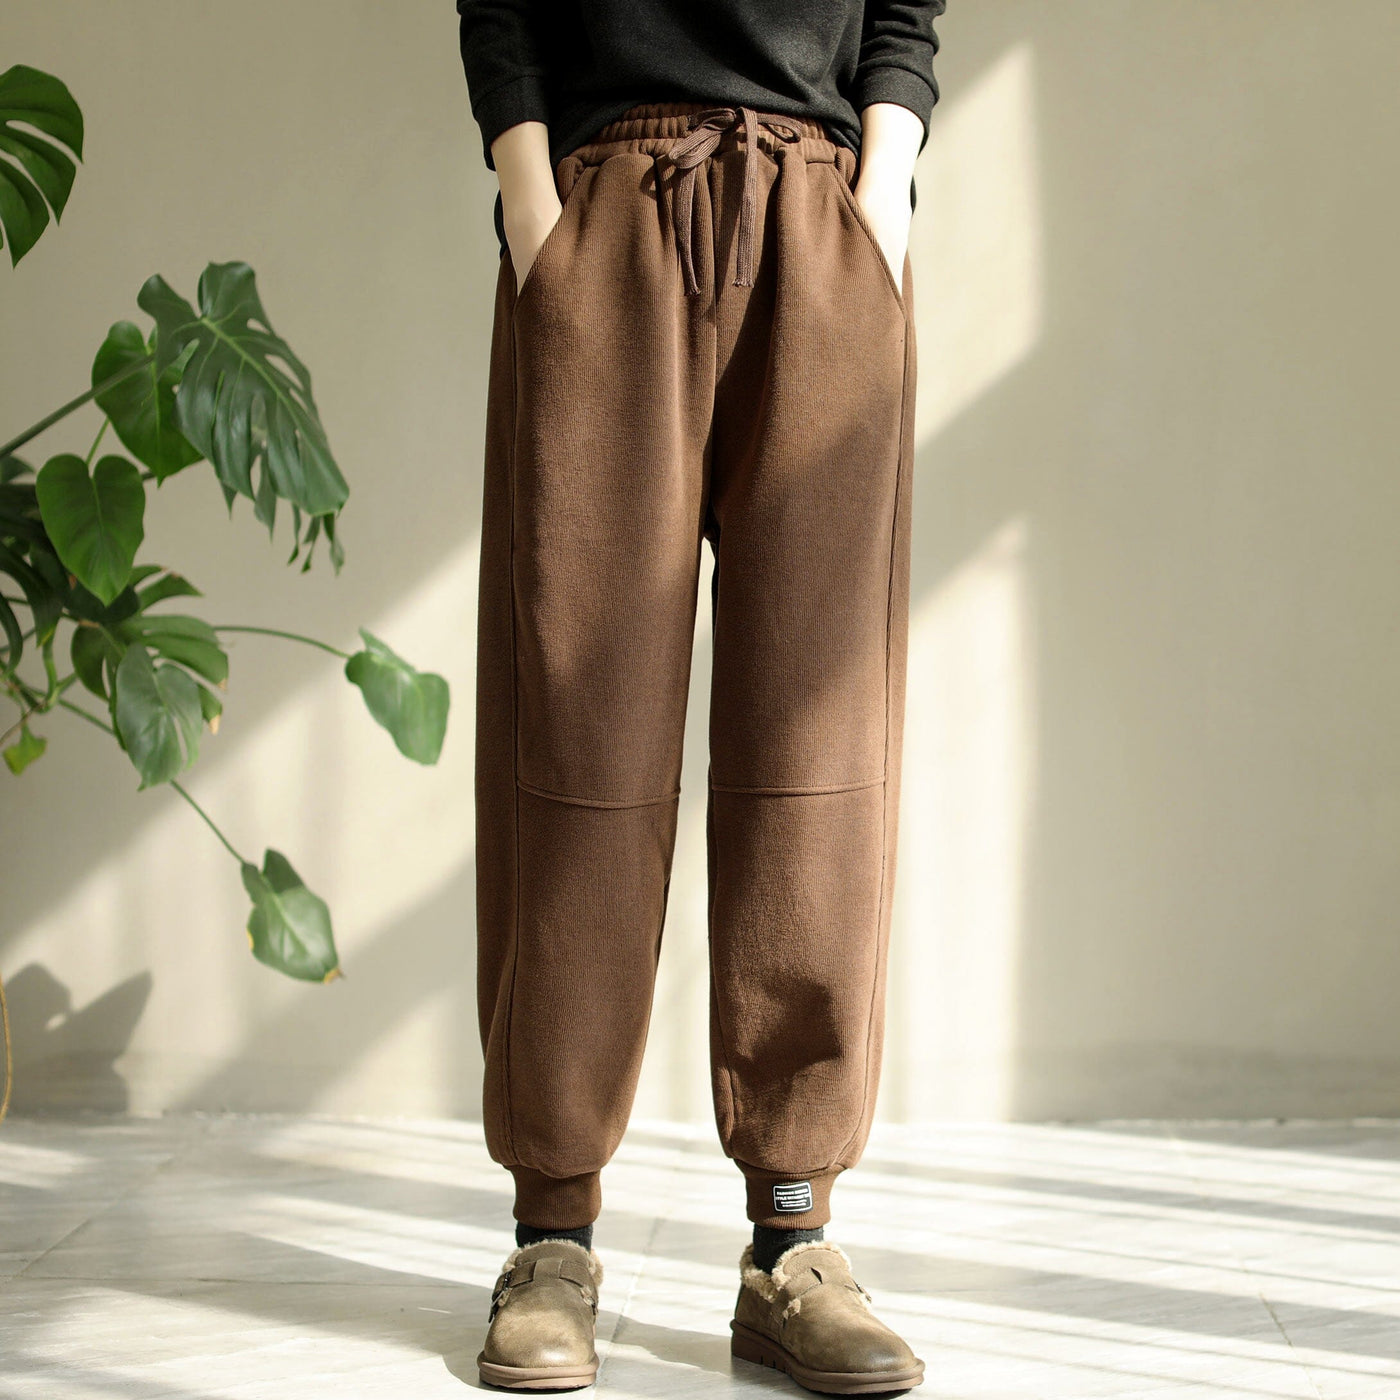 Winter Casual Elastic Furred Harem Pants Nov 2022 New Arrival One Size Coffee 